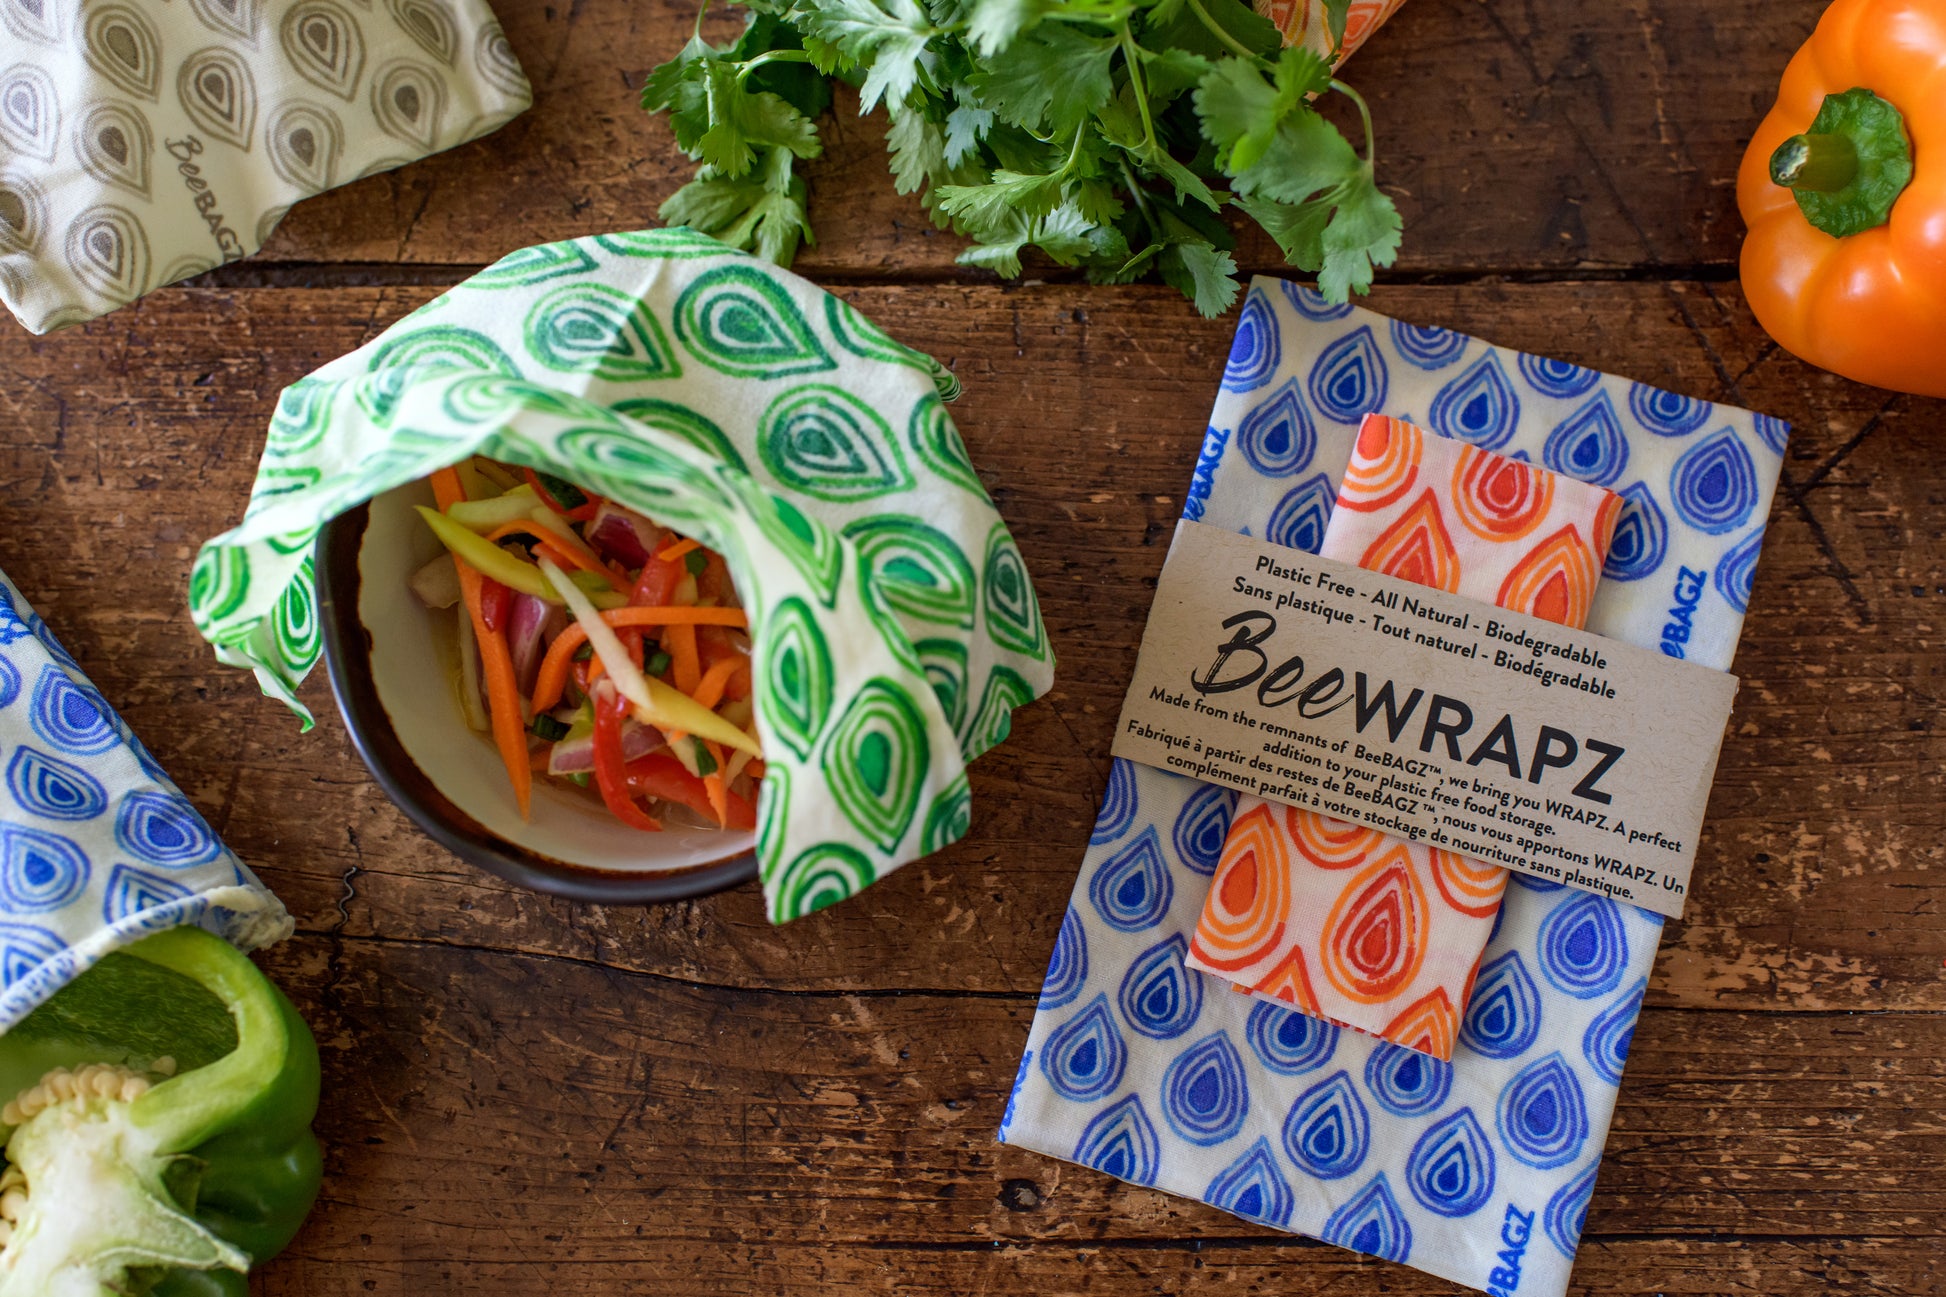 Beeswax wrap that solves your food storage needs. BeeWRAPZ™ are reusable food wraps that tightly cover the tops of cans, bowls, glasses or wrap your cut fruits and veggies keeping them fresher, longer. Another great addition to your plastic free food storage lineup.